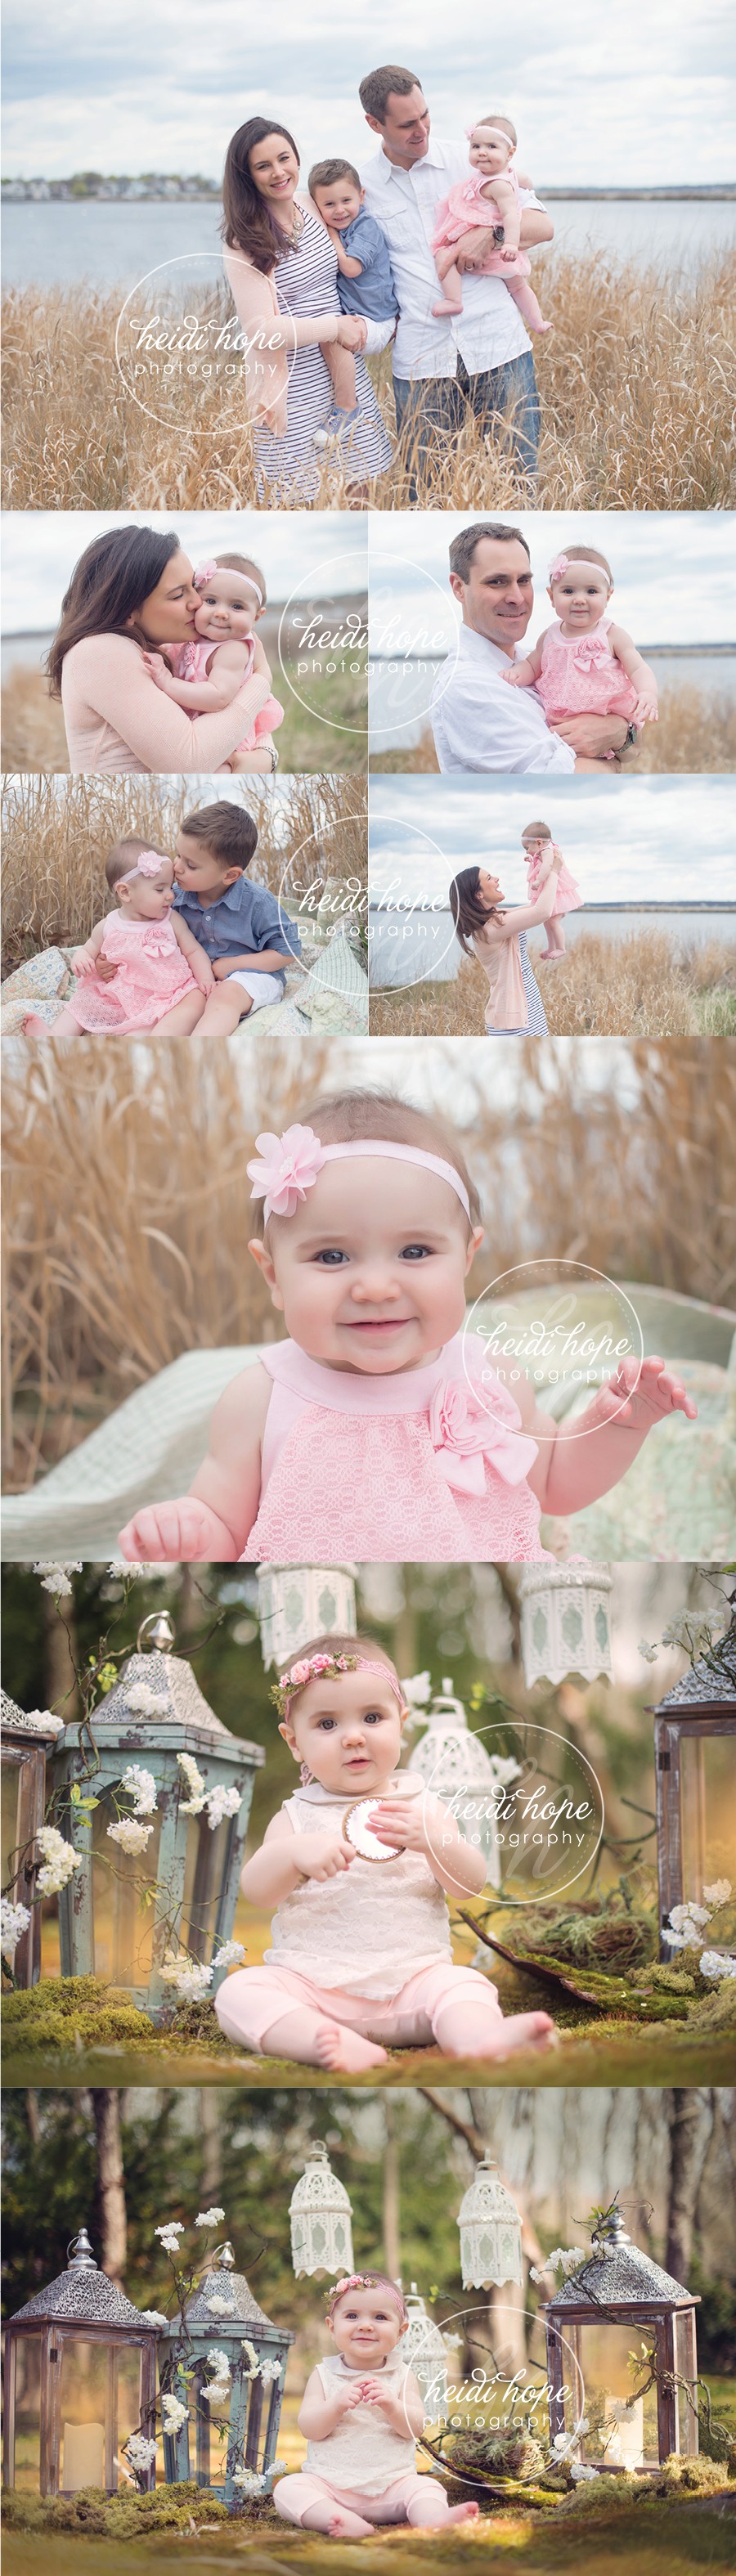 Baby Planner R’s 6 Month Shoot!